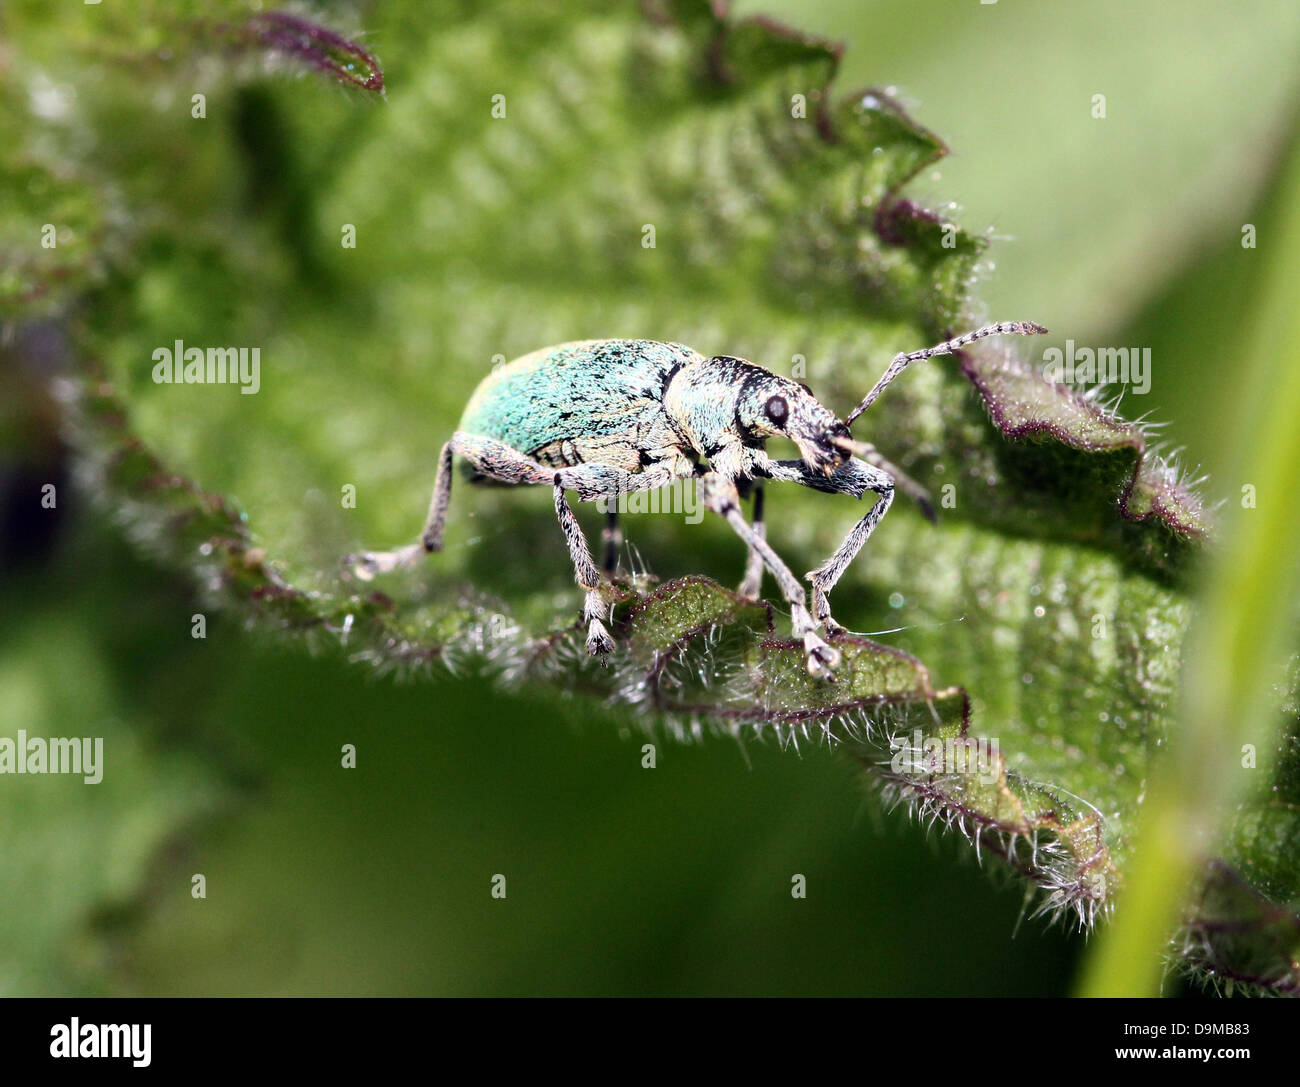 Close-up macro image of  the small  Silver-green leaf Weevil (Phyllobius argentatus) posing on a leaf Stock Photo